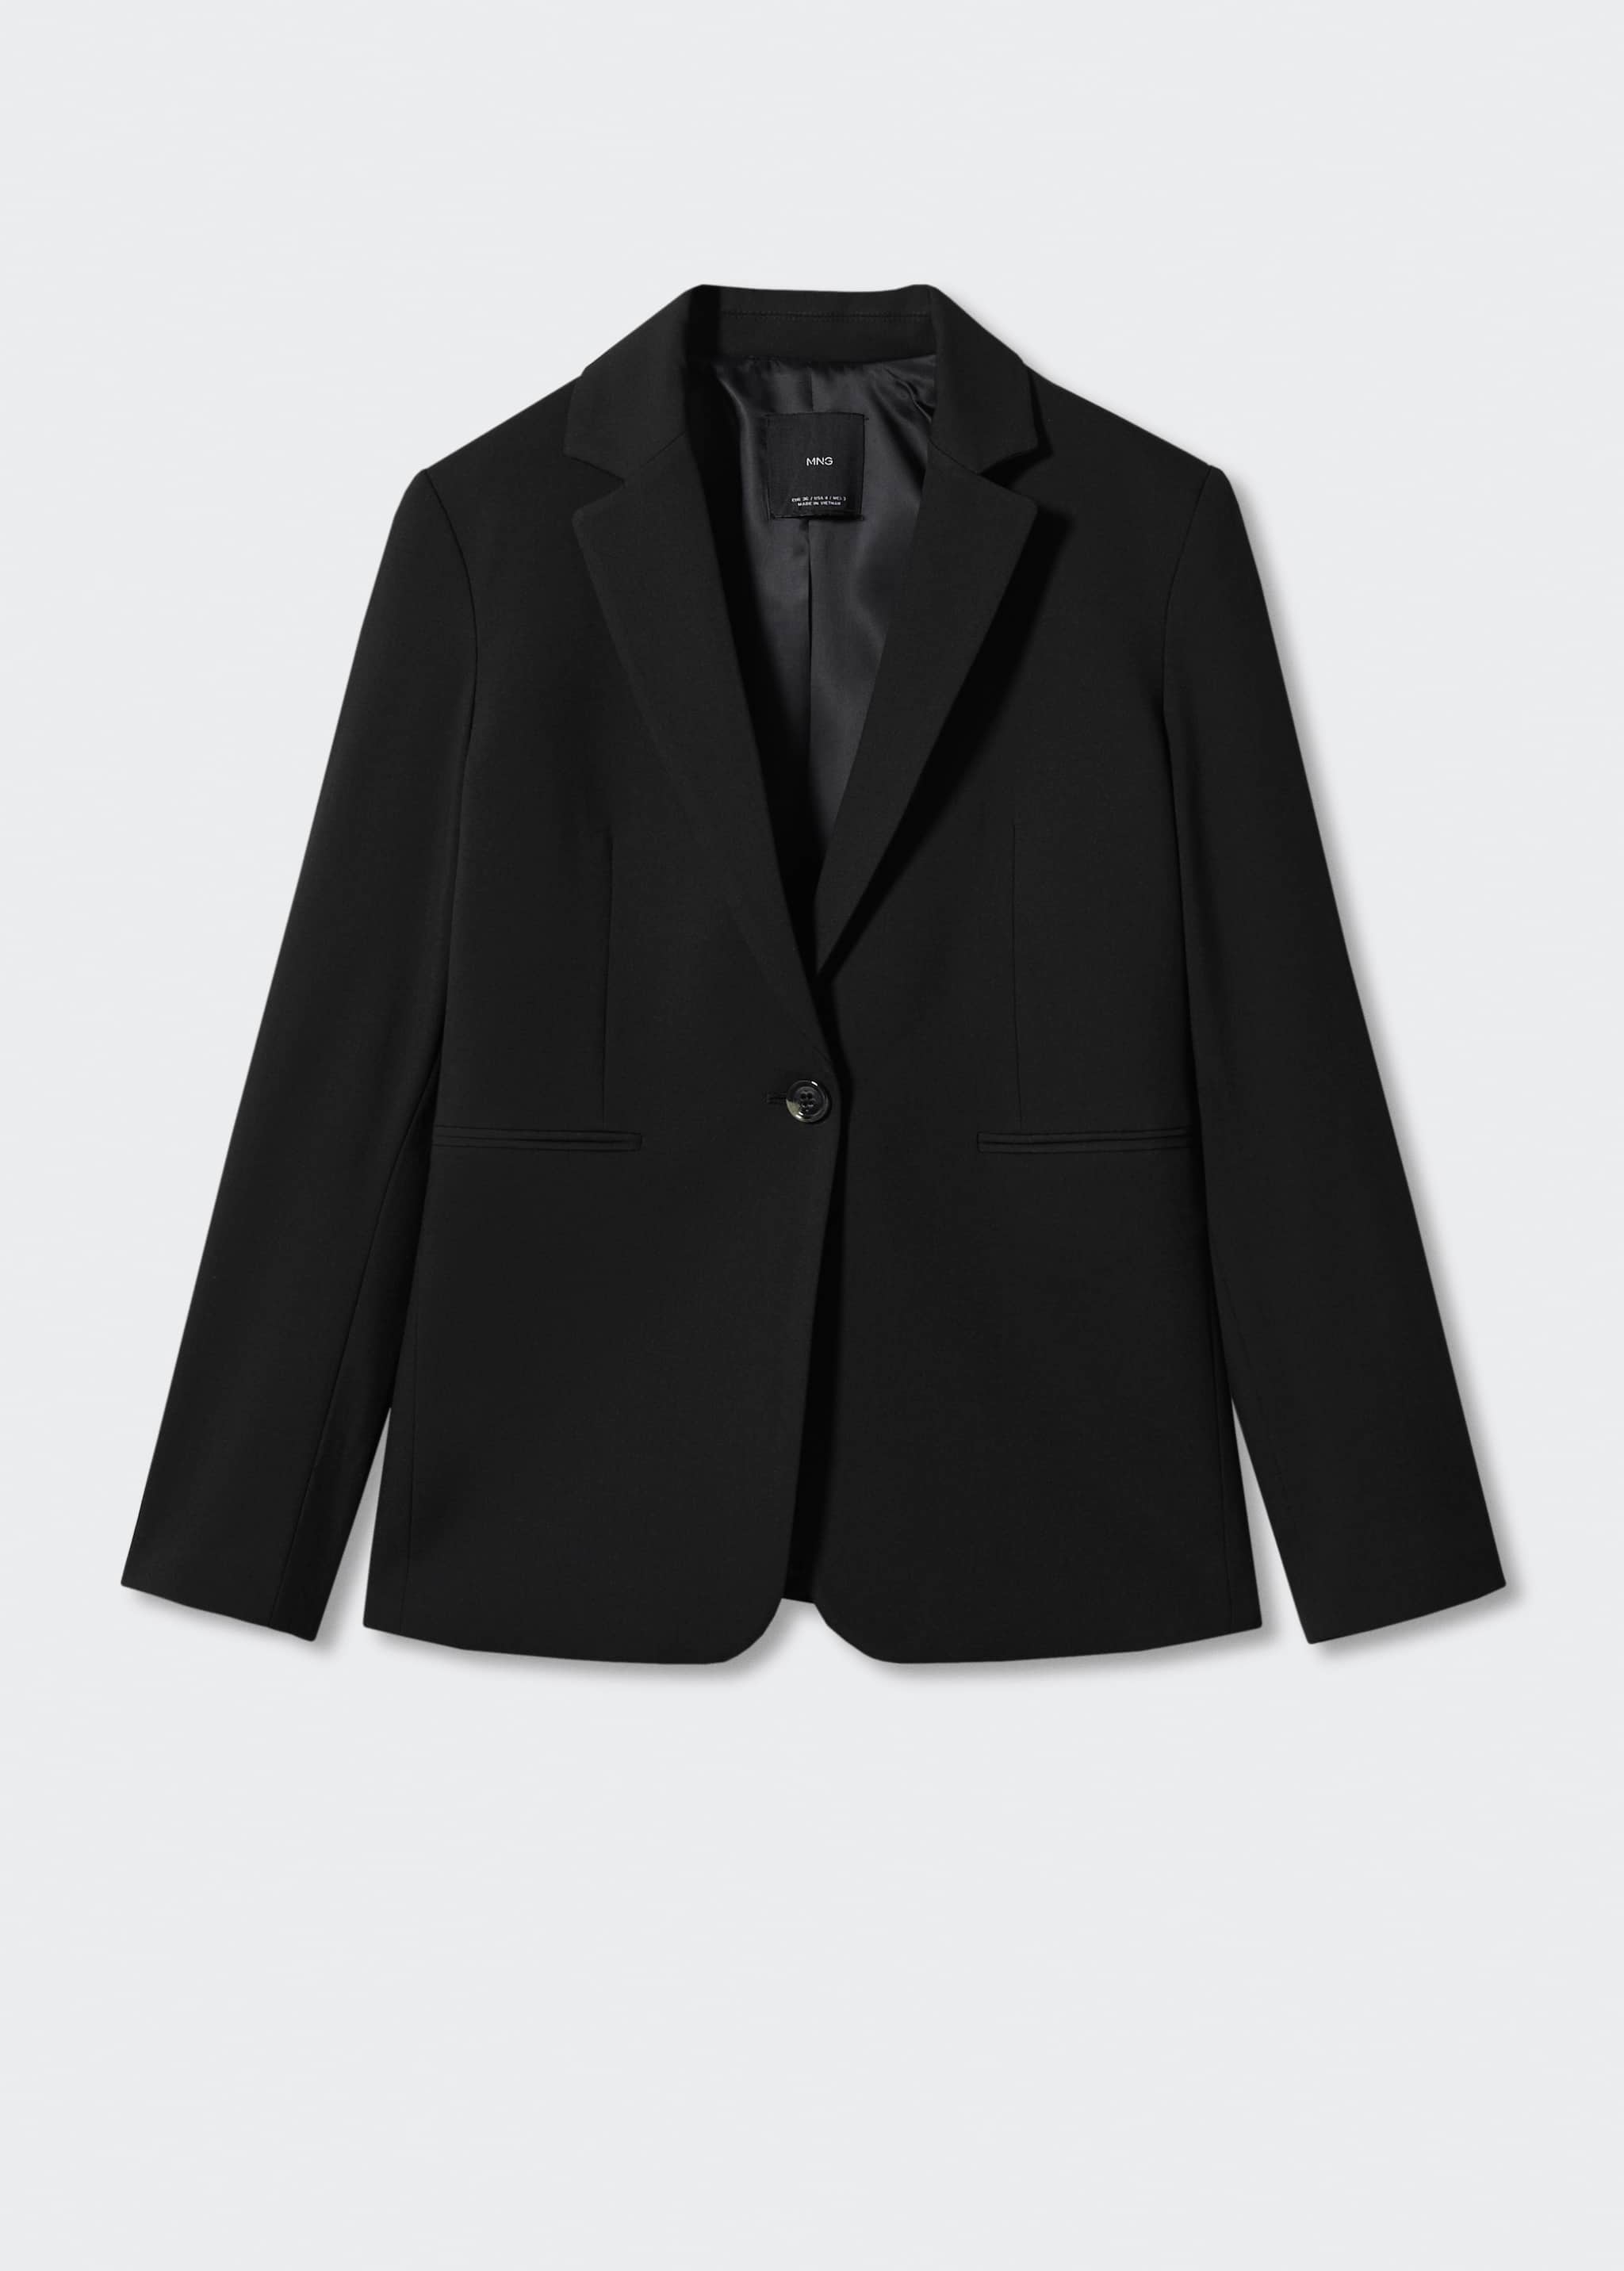 Fitted suit jacket - Article without model